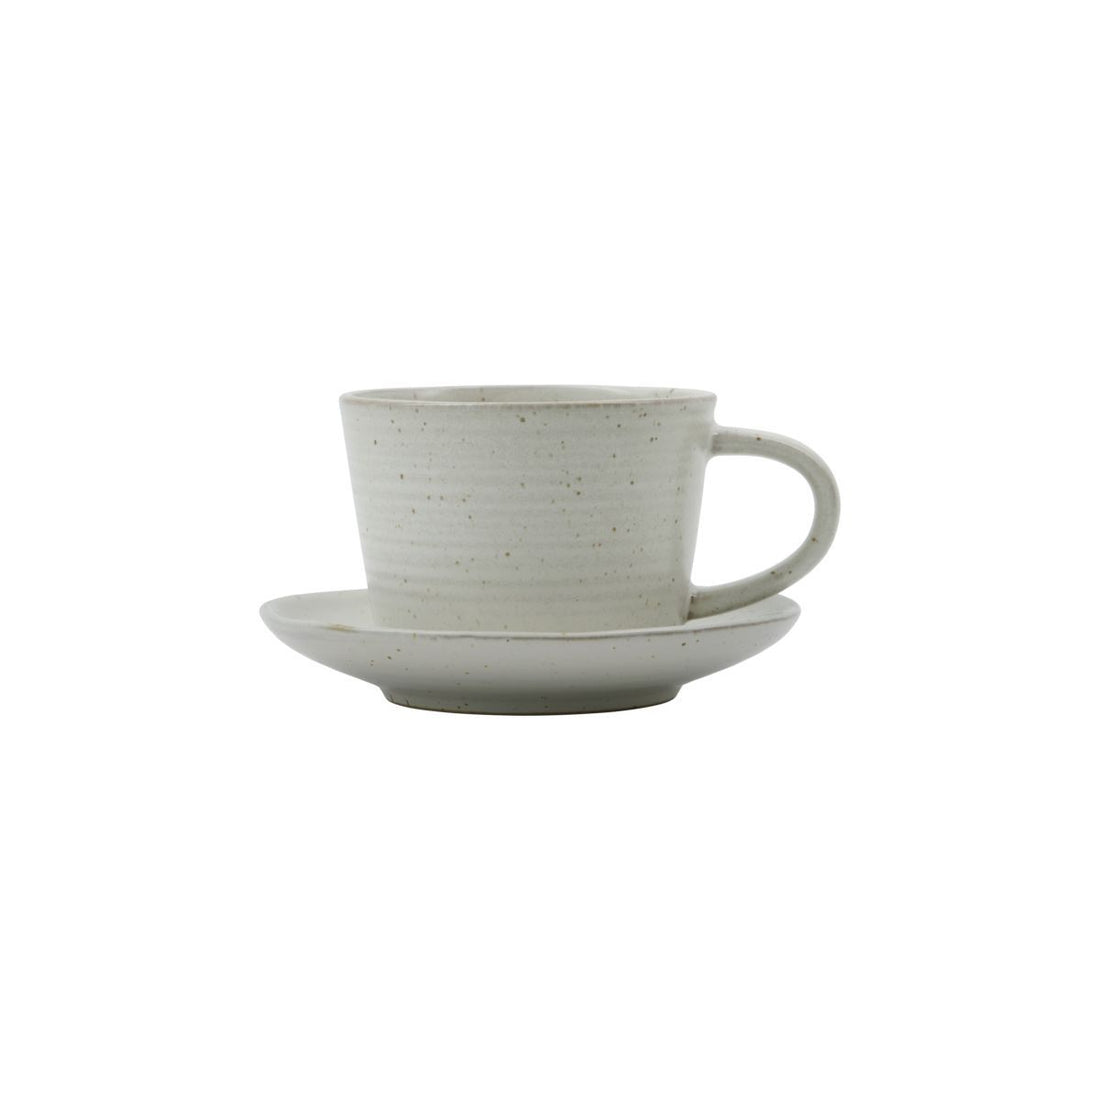 House Doctor cup with saucer, hdpion, gray/white